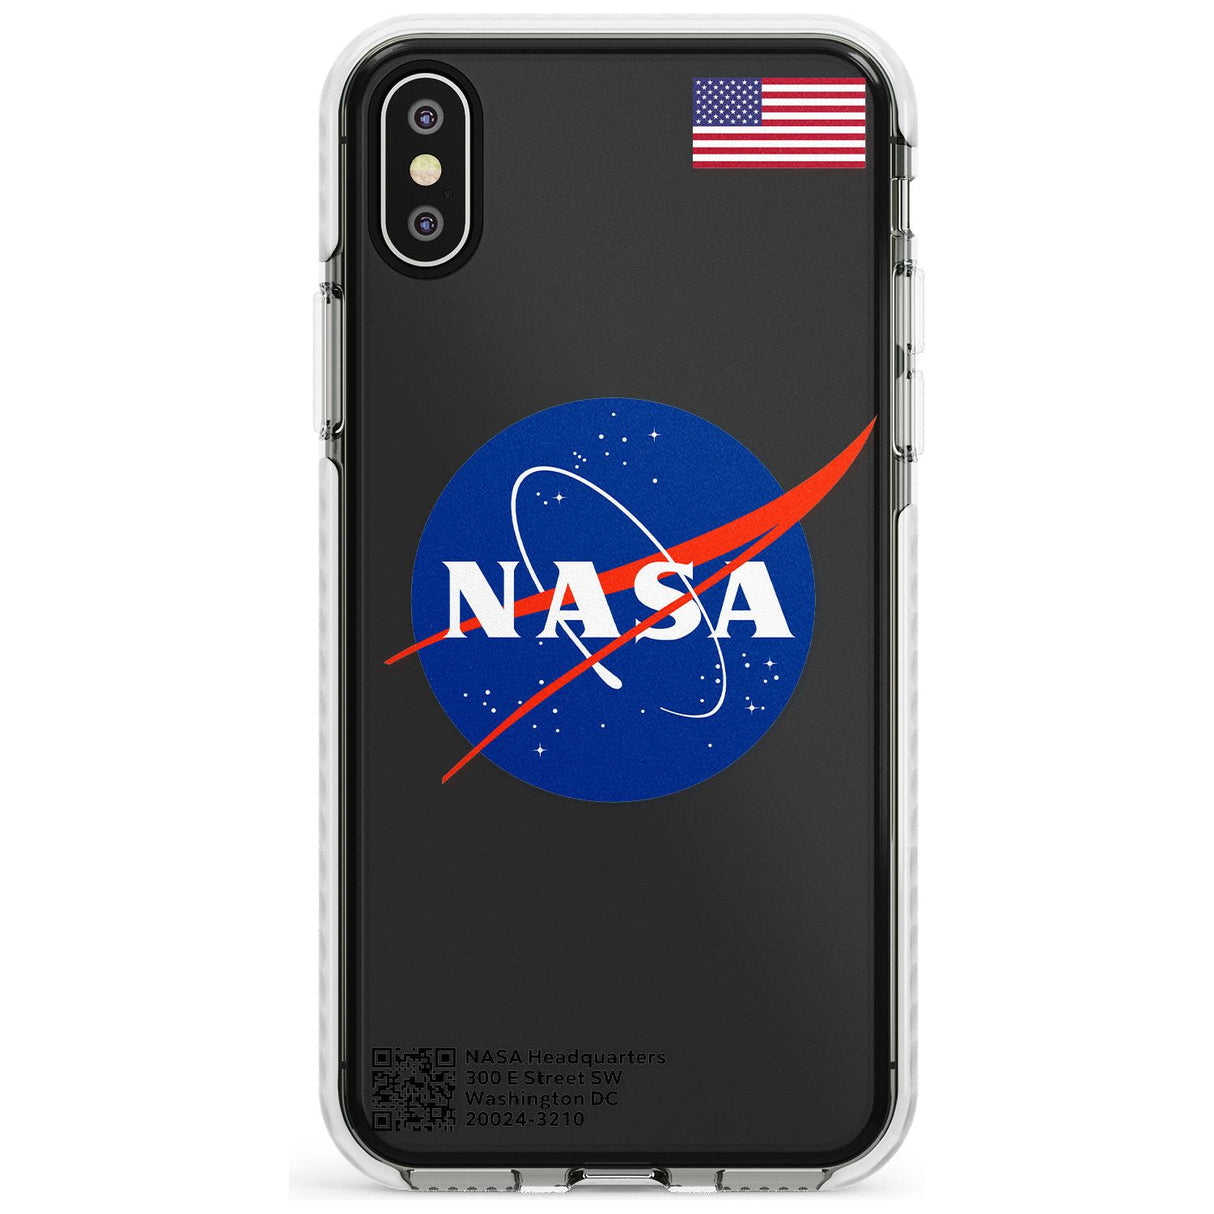 NASA Meatball Impact Phone Case for iPhone X XS Max XR